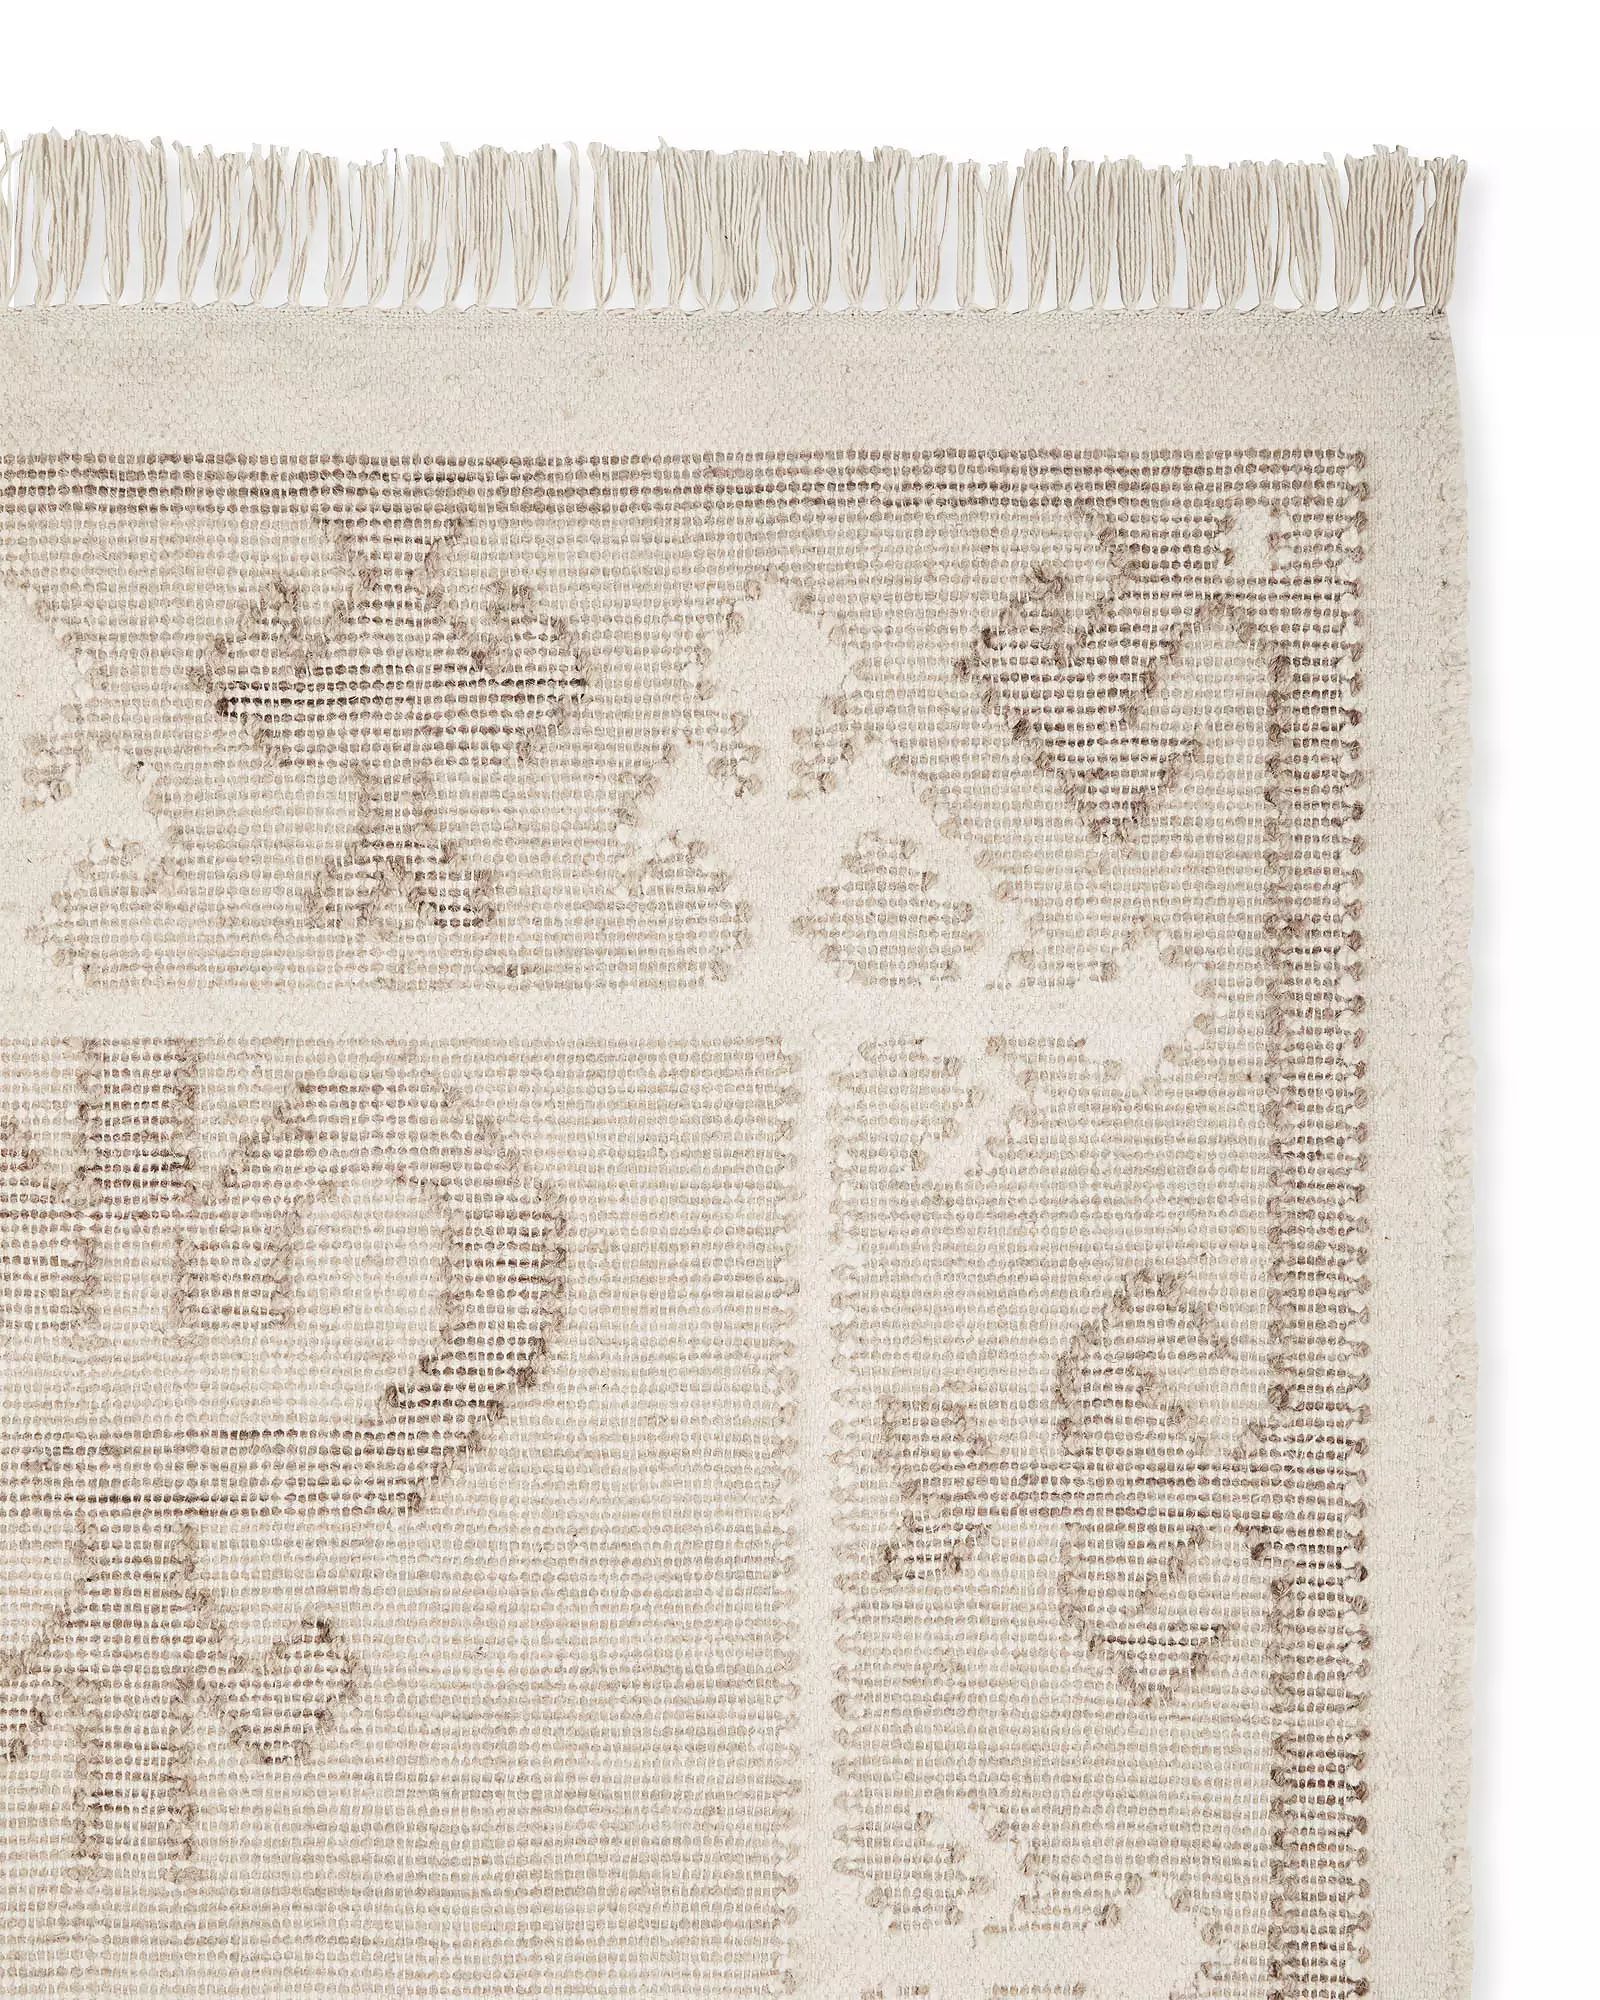 Alamere Rug | Serena and Lily